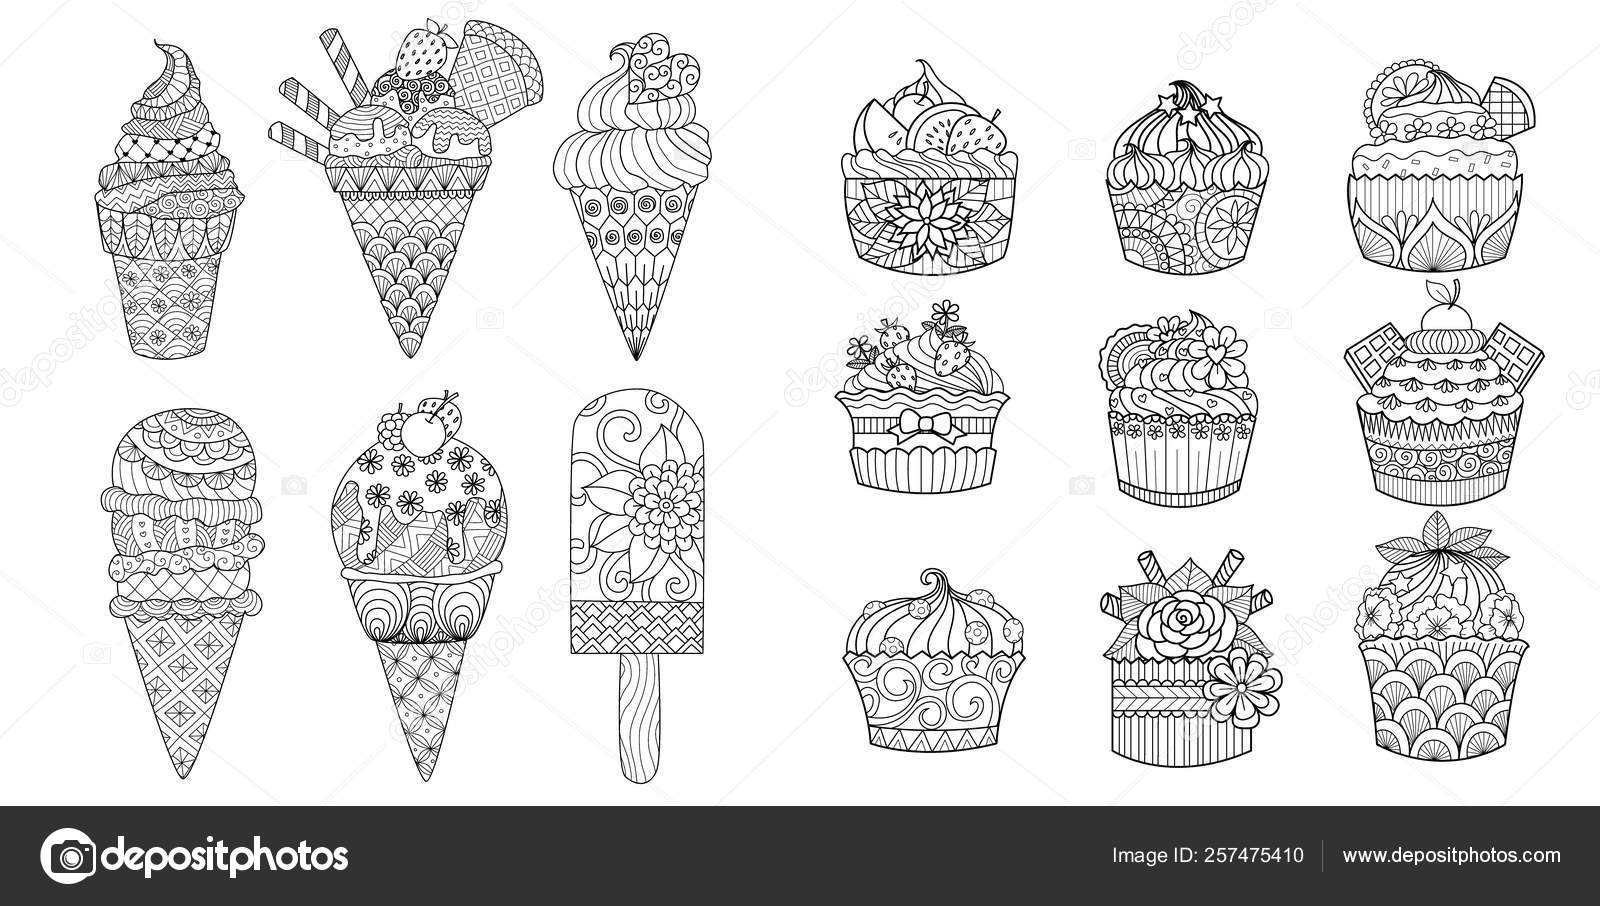 Drawing ice cream cupcakes set adult coloring book coloring page stock vector by somjaicindygmail